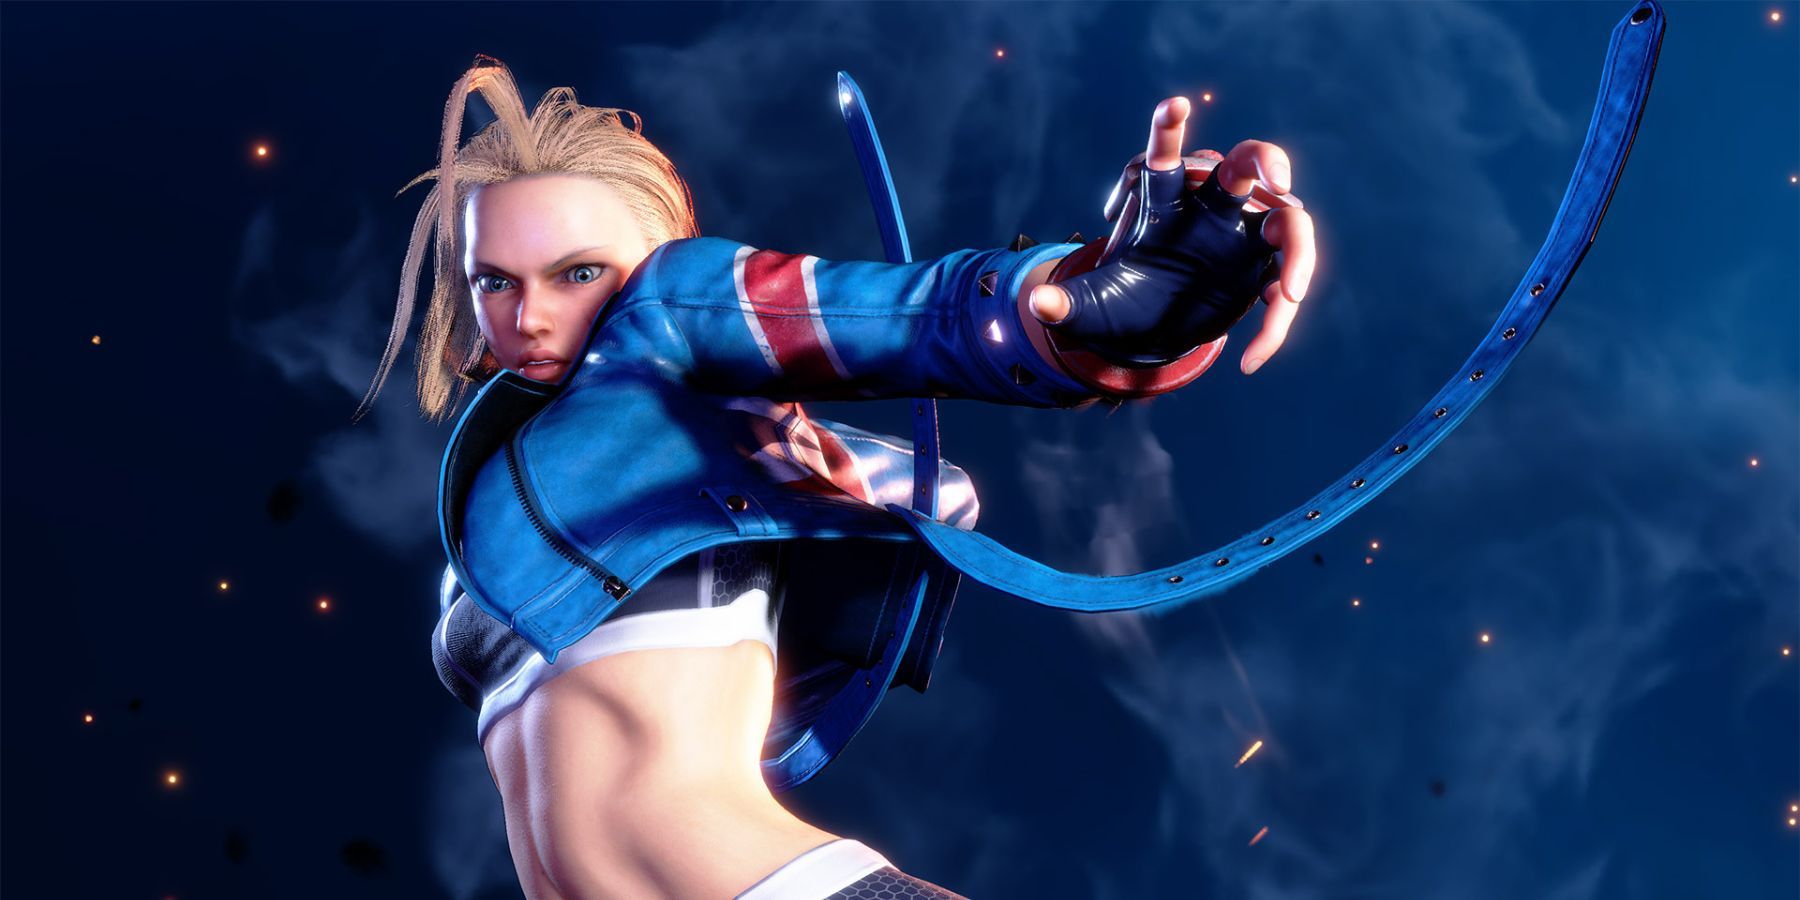 image showing cammy in street fighter 6.